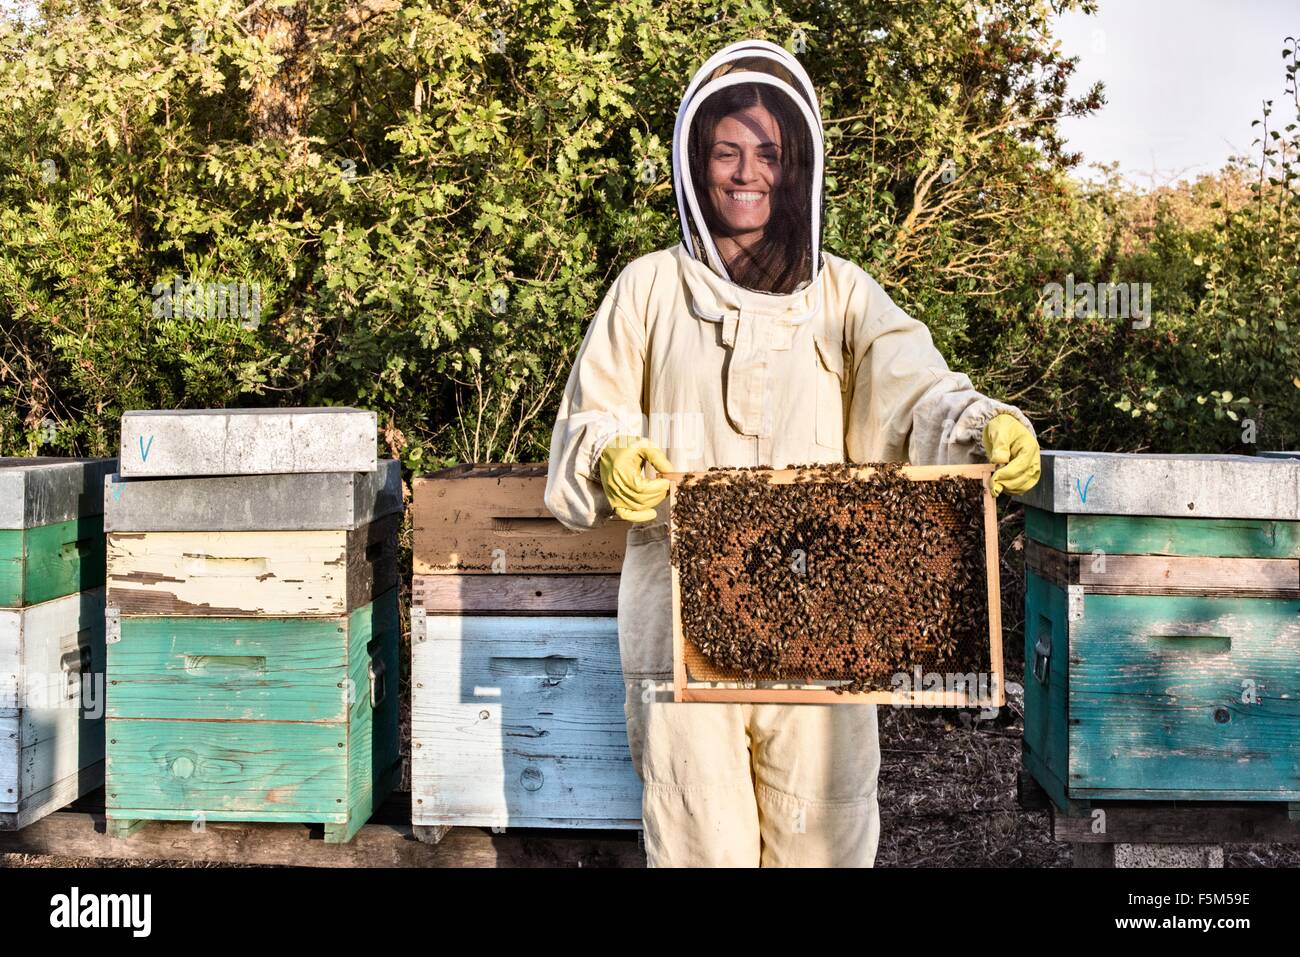 Portrait of woman in beekeeper dress holding a hive frame full of bees Stock Photo